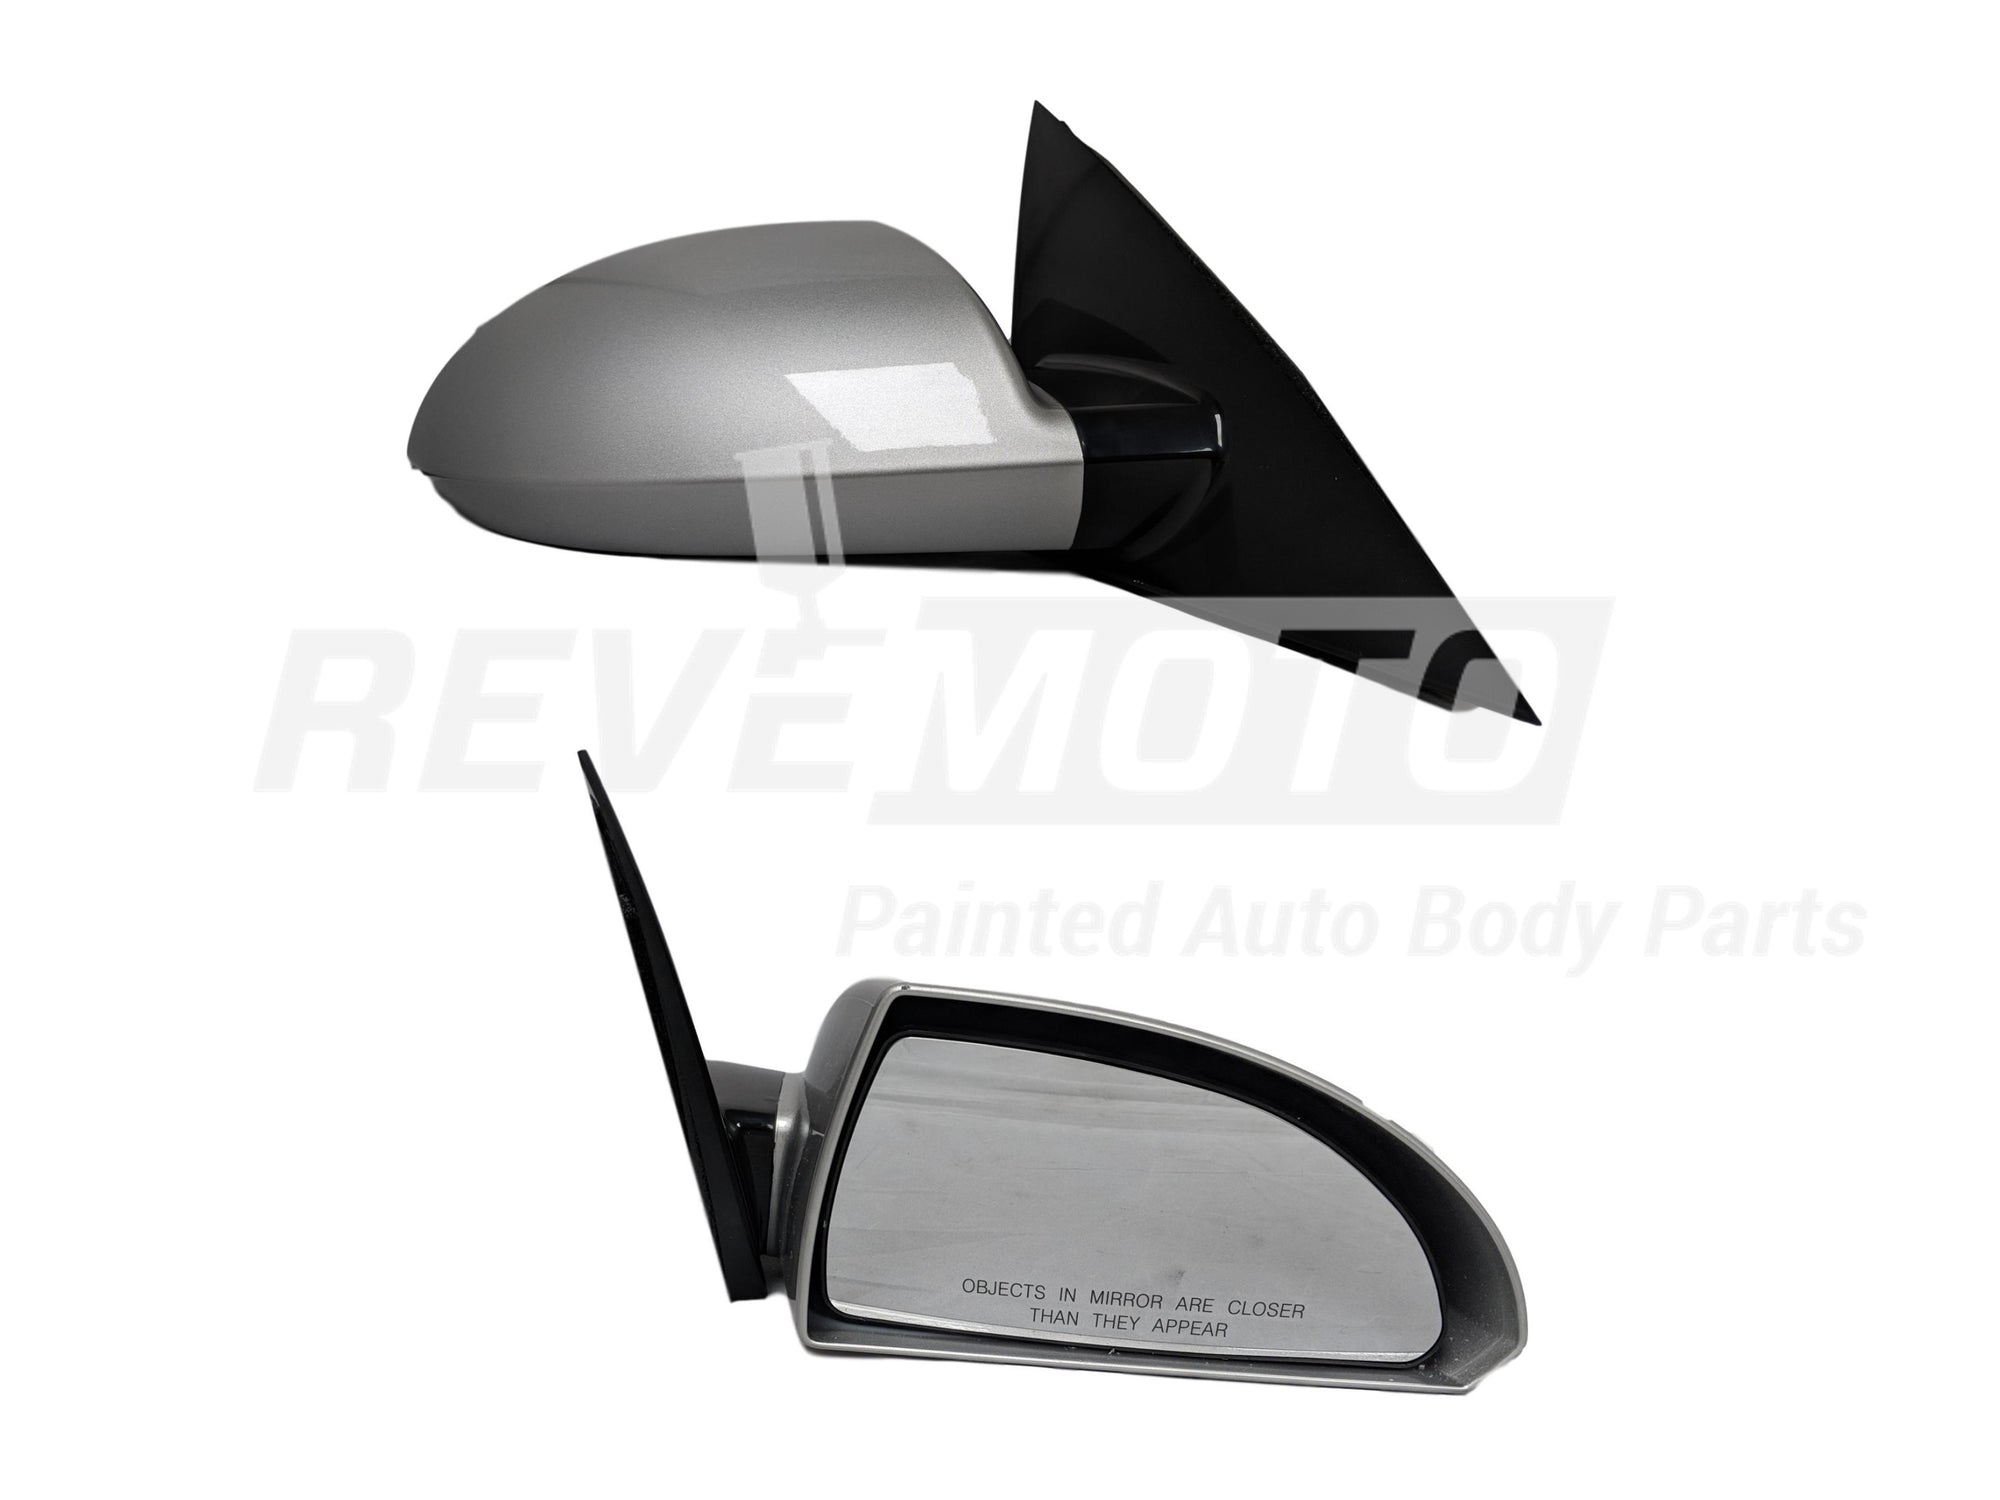 2008 Chevrolet Impala Passenger Side View Mirror, Non Heated, Smooth Base, Painted Light Tarnished Silver Metallic (WA994L)_20759191